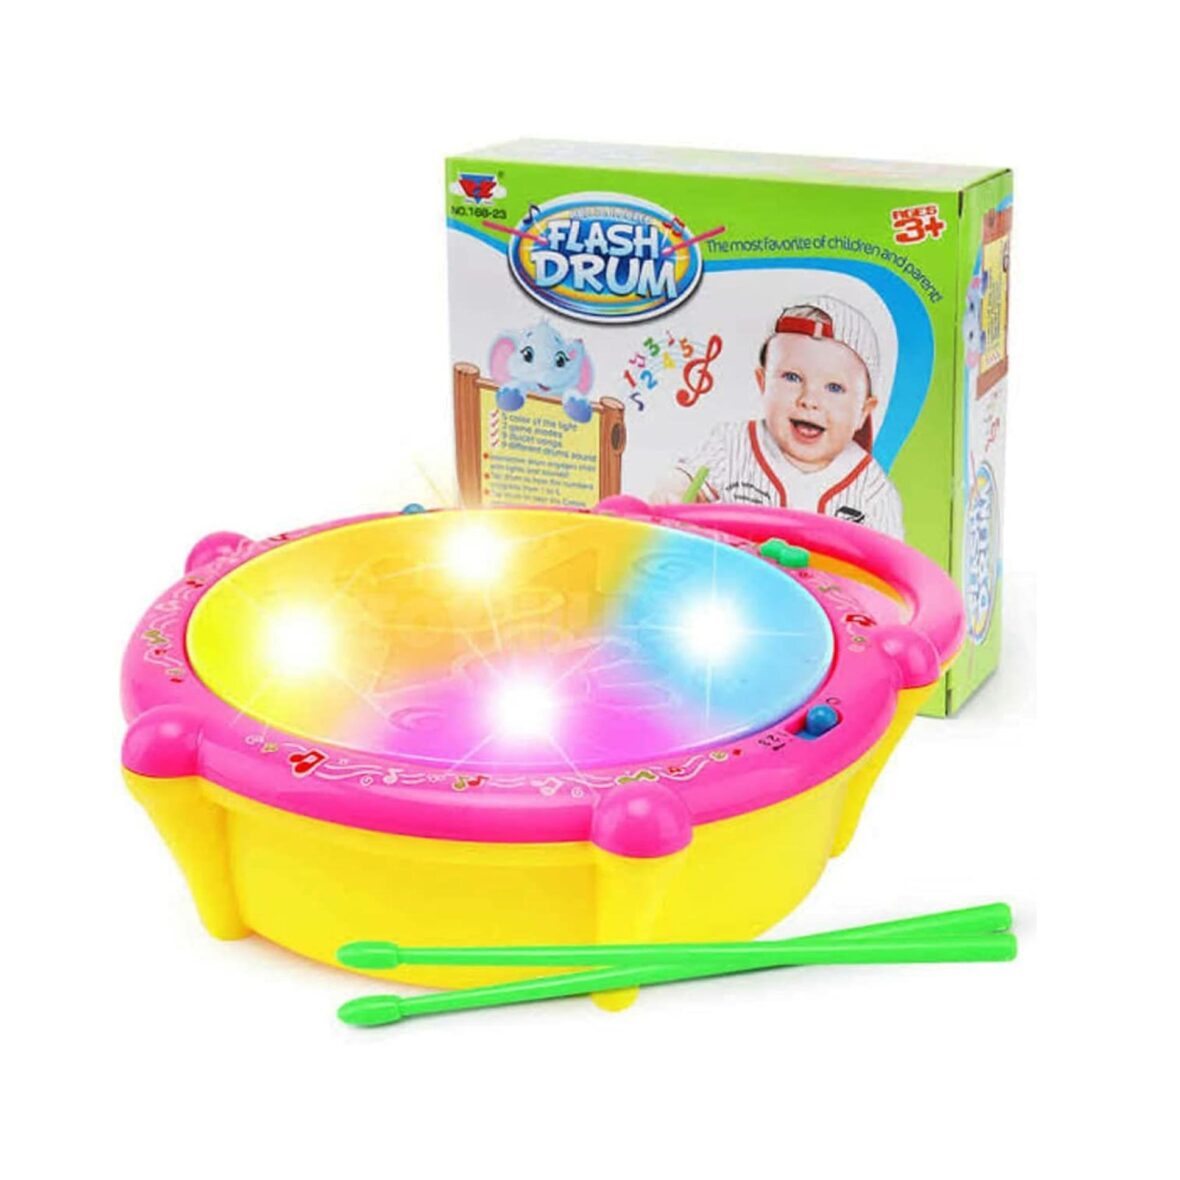 3D Musical Flash Drum with Lights – Multicolour